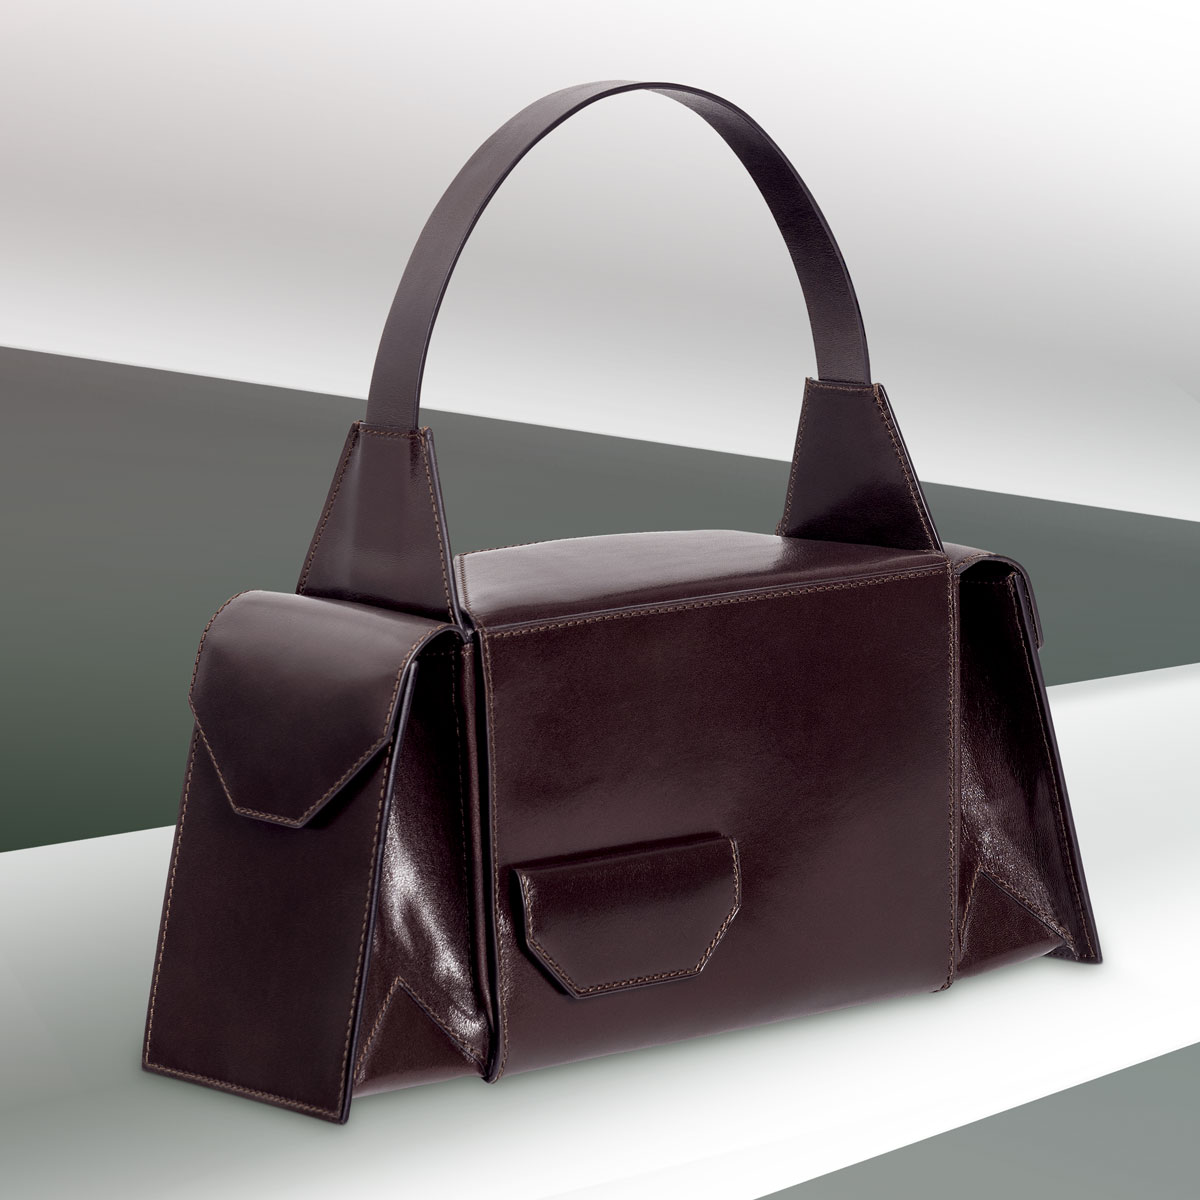 Merryl Tielman, Barbara bag: an elegant yet sturdy handbag with two large outside pockets to carry your things in an organized manner. Made in Italy, vegetable tanned cow leather, colour aubergine.